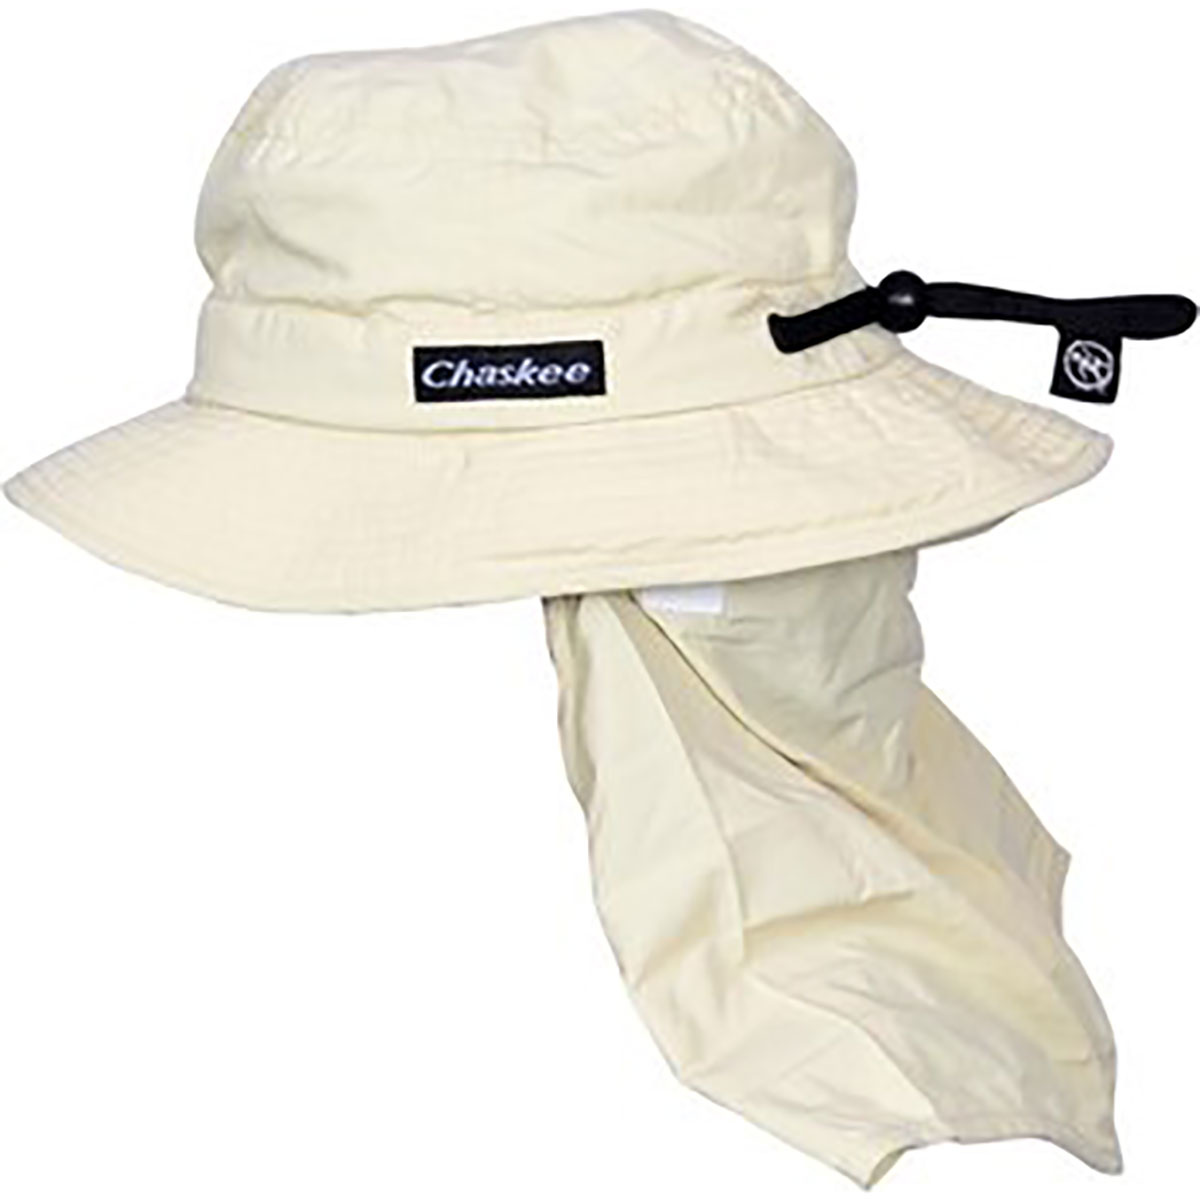 Image of Chaskee Cappello Bob Neck Protection